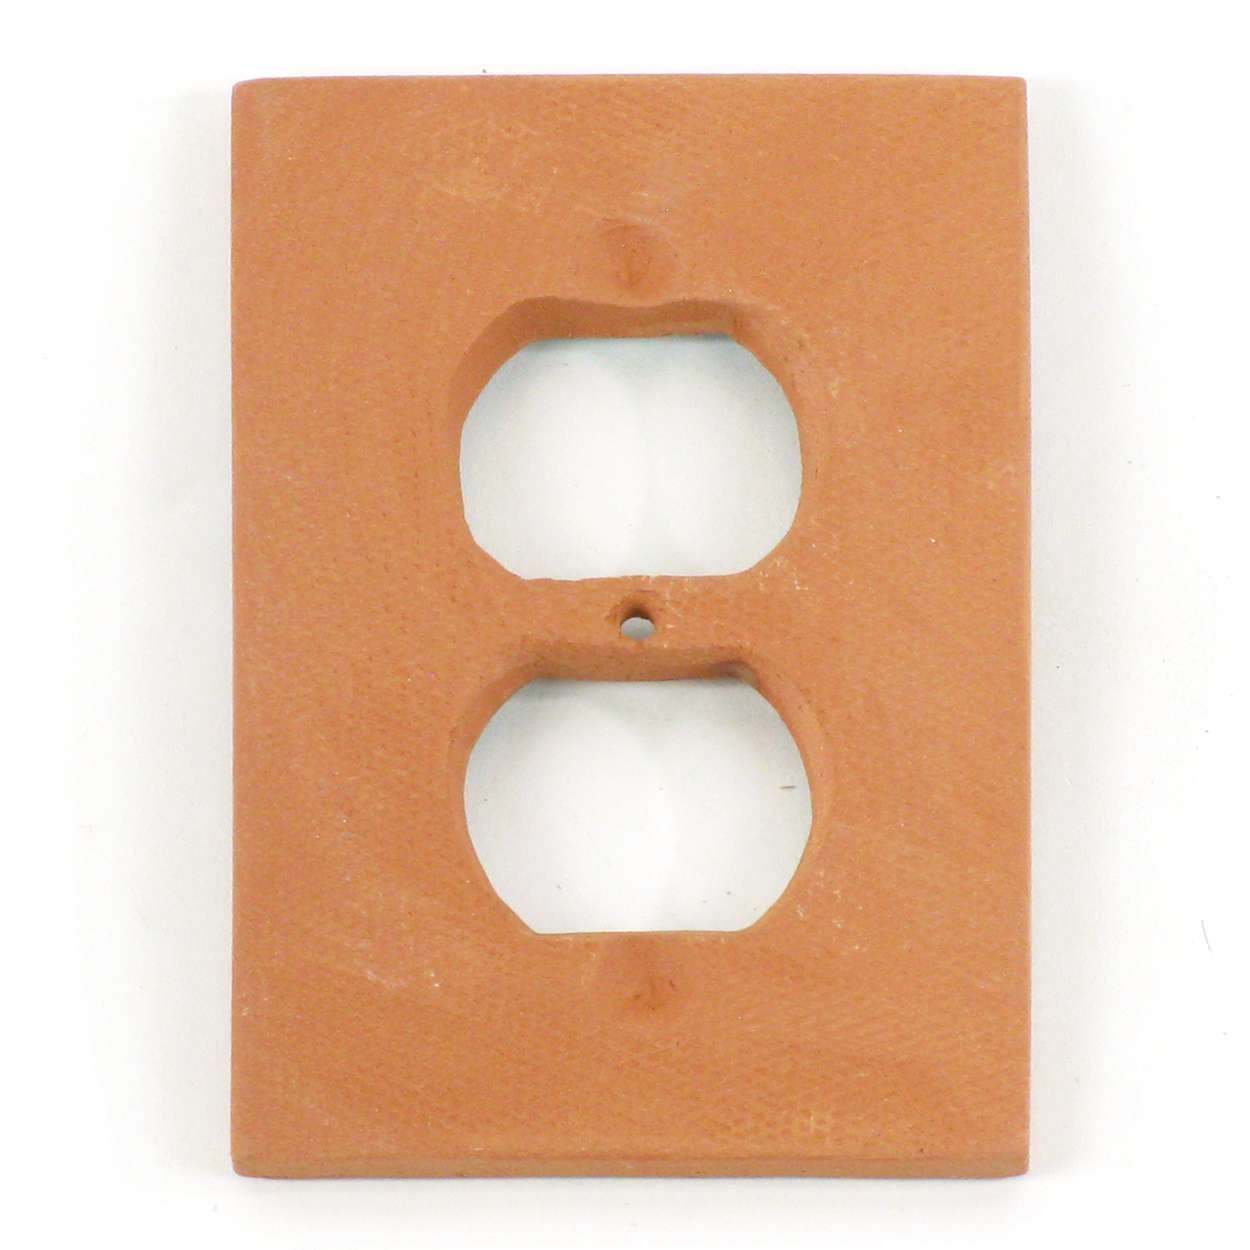 128049 - Terra Cotta Outlet Cover - Palm Beach